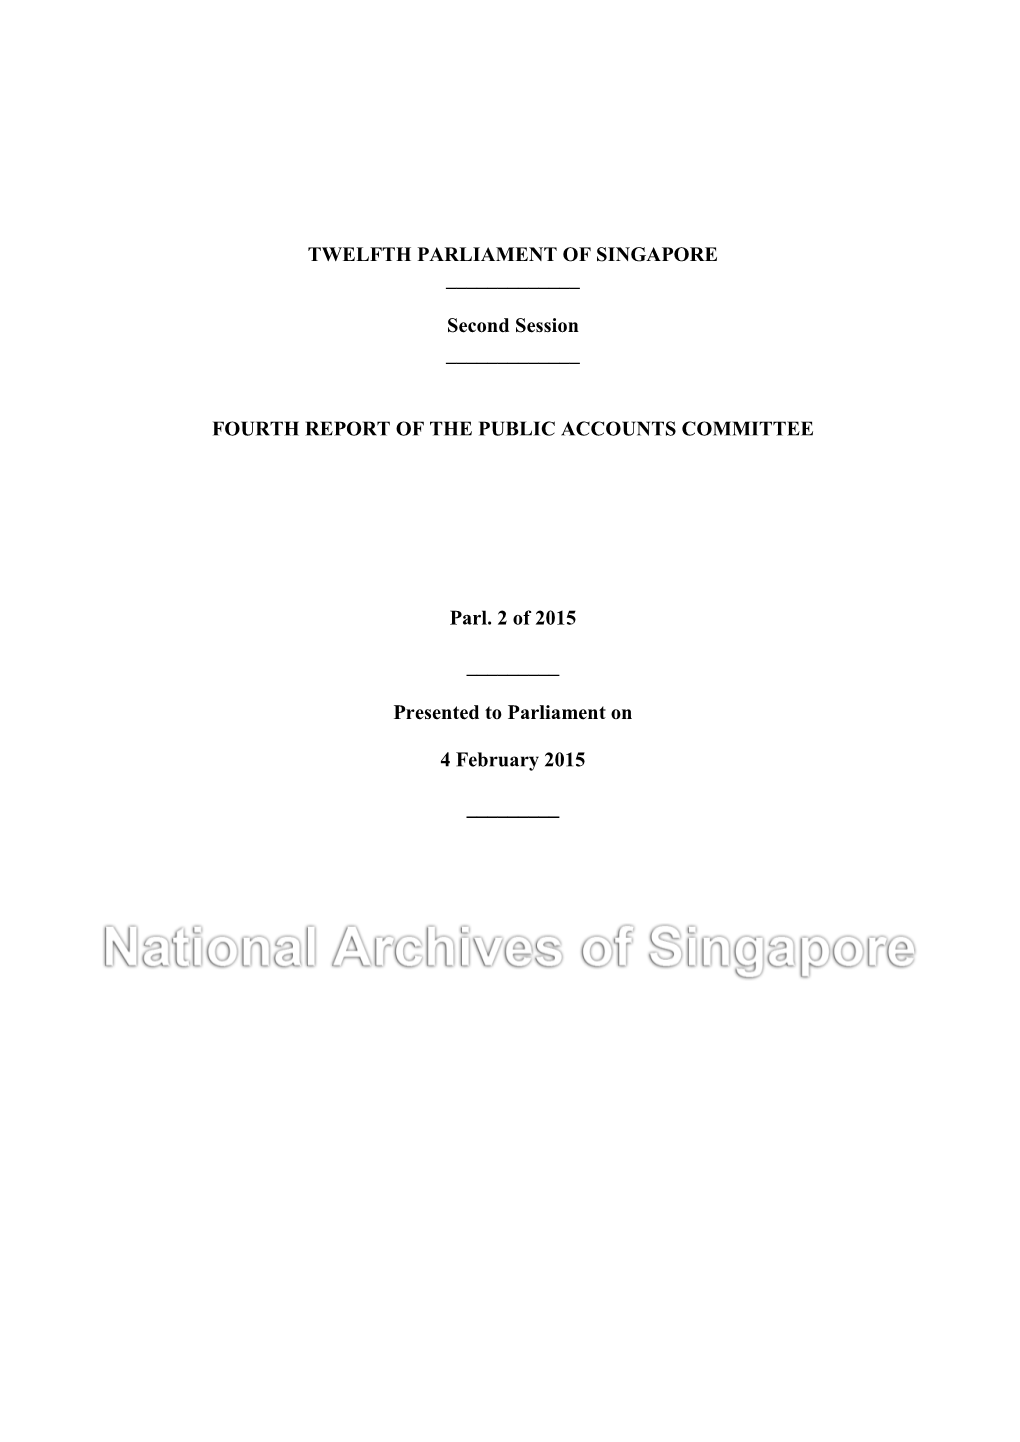 FOURTH REPORT of the PUBLIC ACCOUNTS COMMITTEE Parl